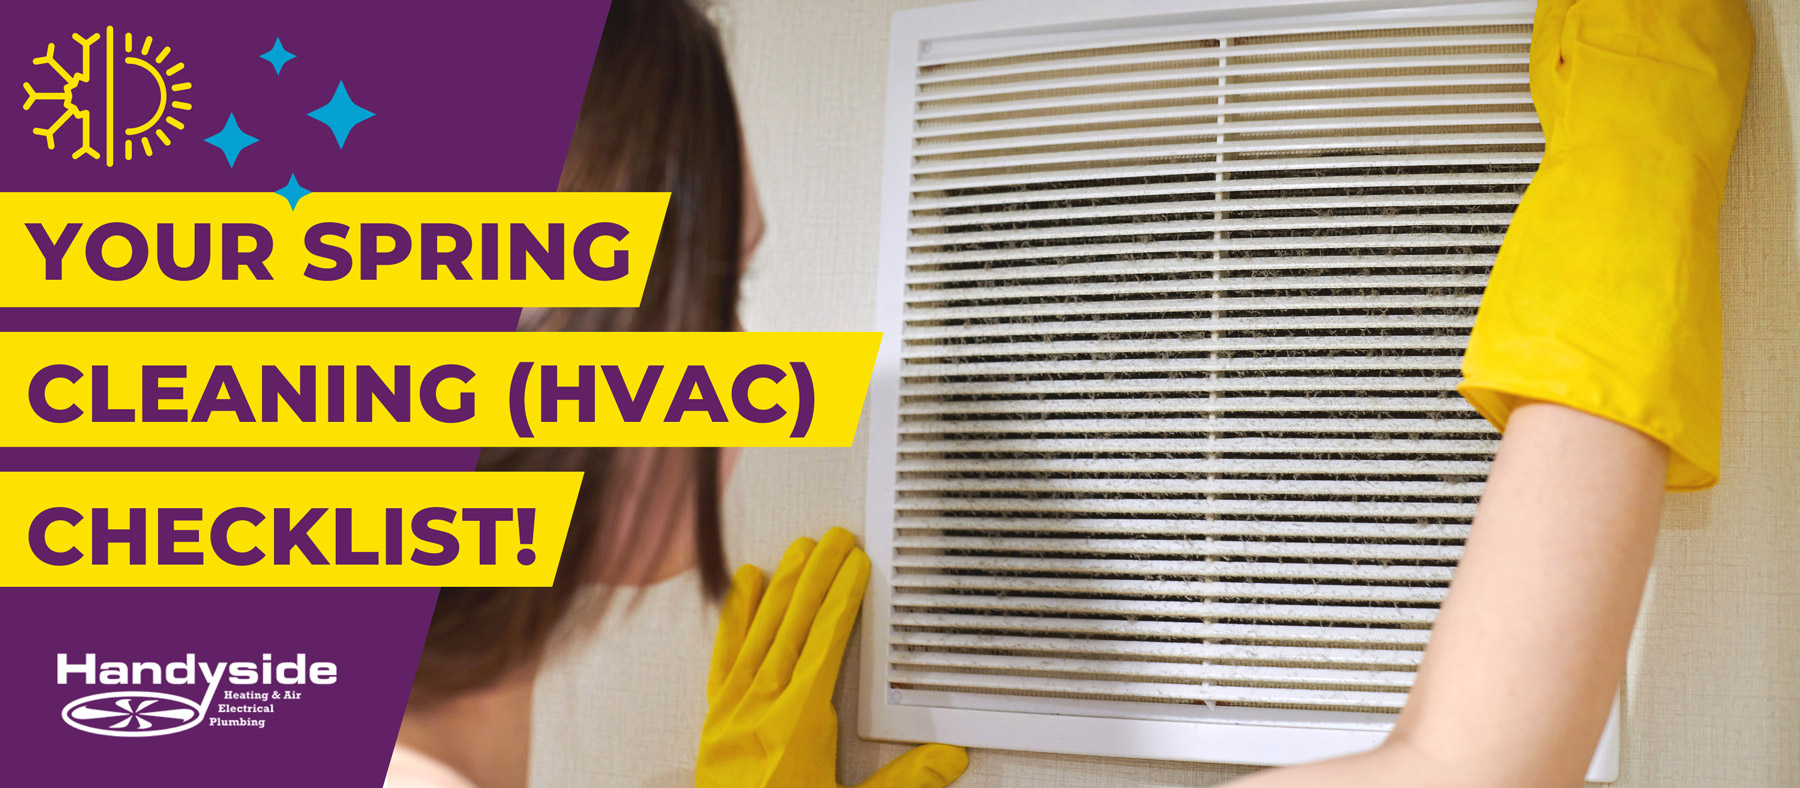 Your Spring Cleaning HVAC Checklist